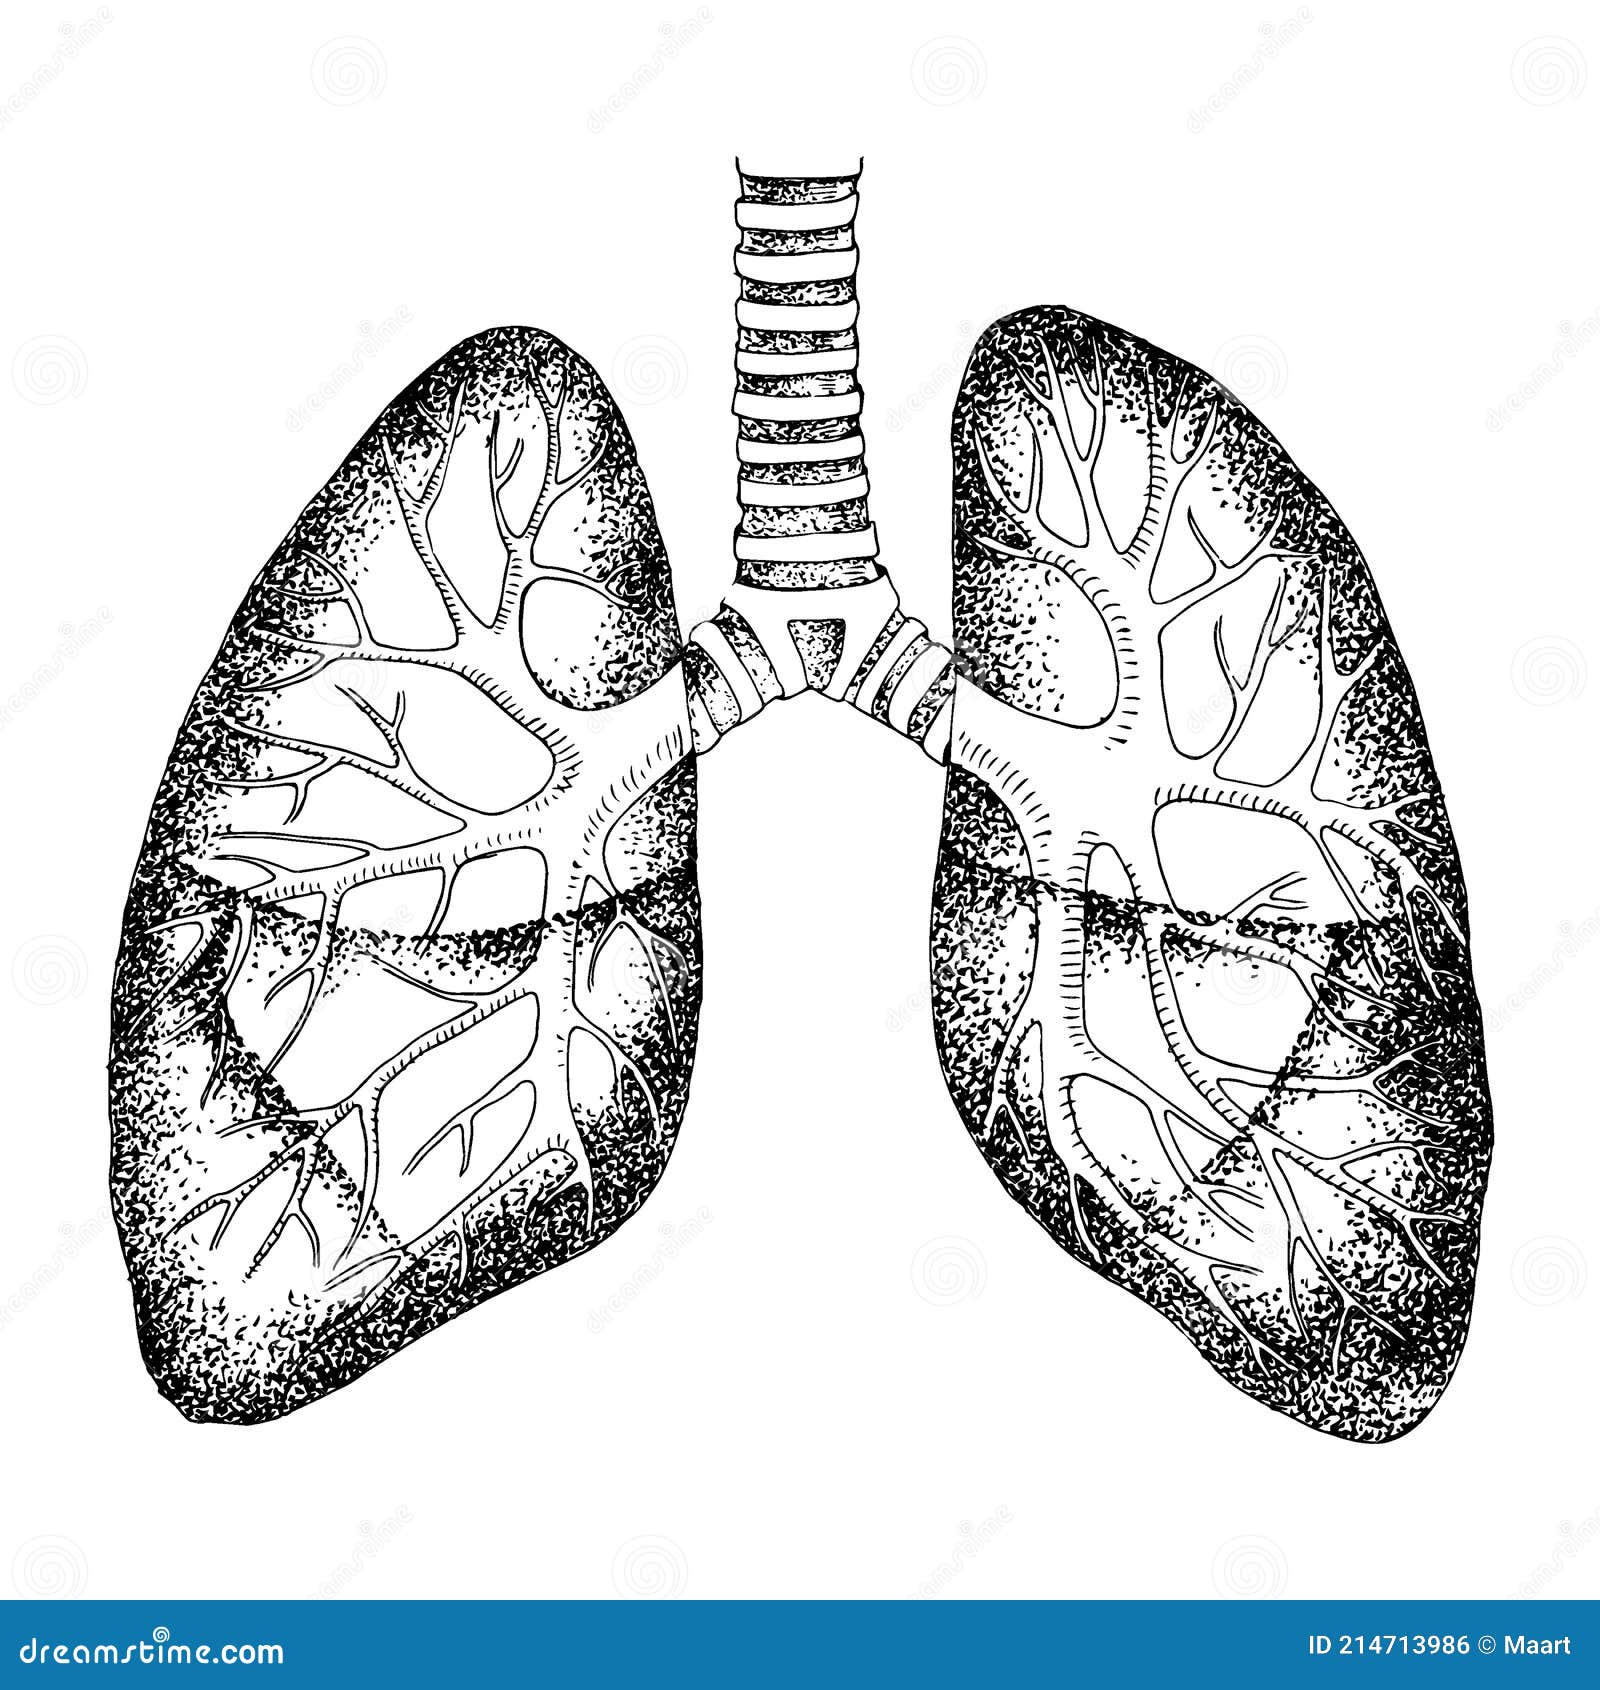 Lungs Drawing  How To Draw Lungs Step By Step